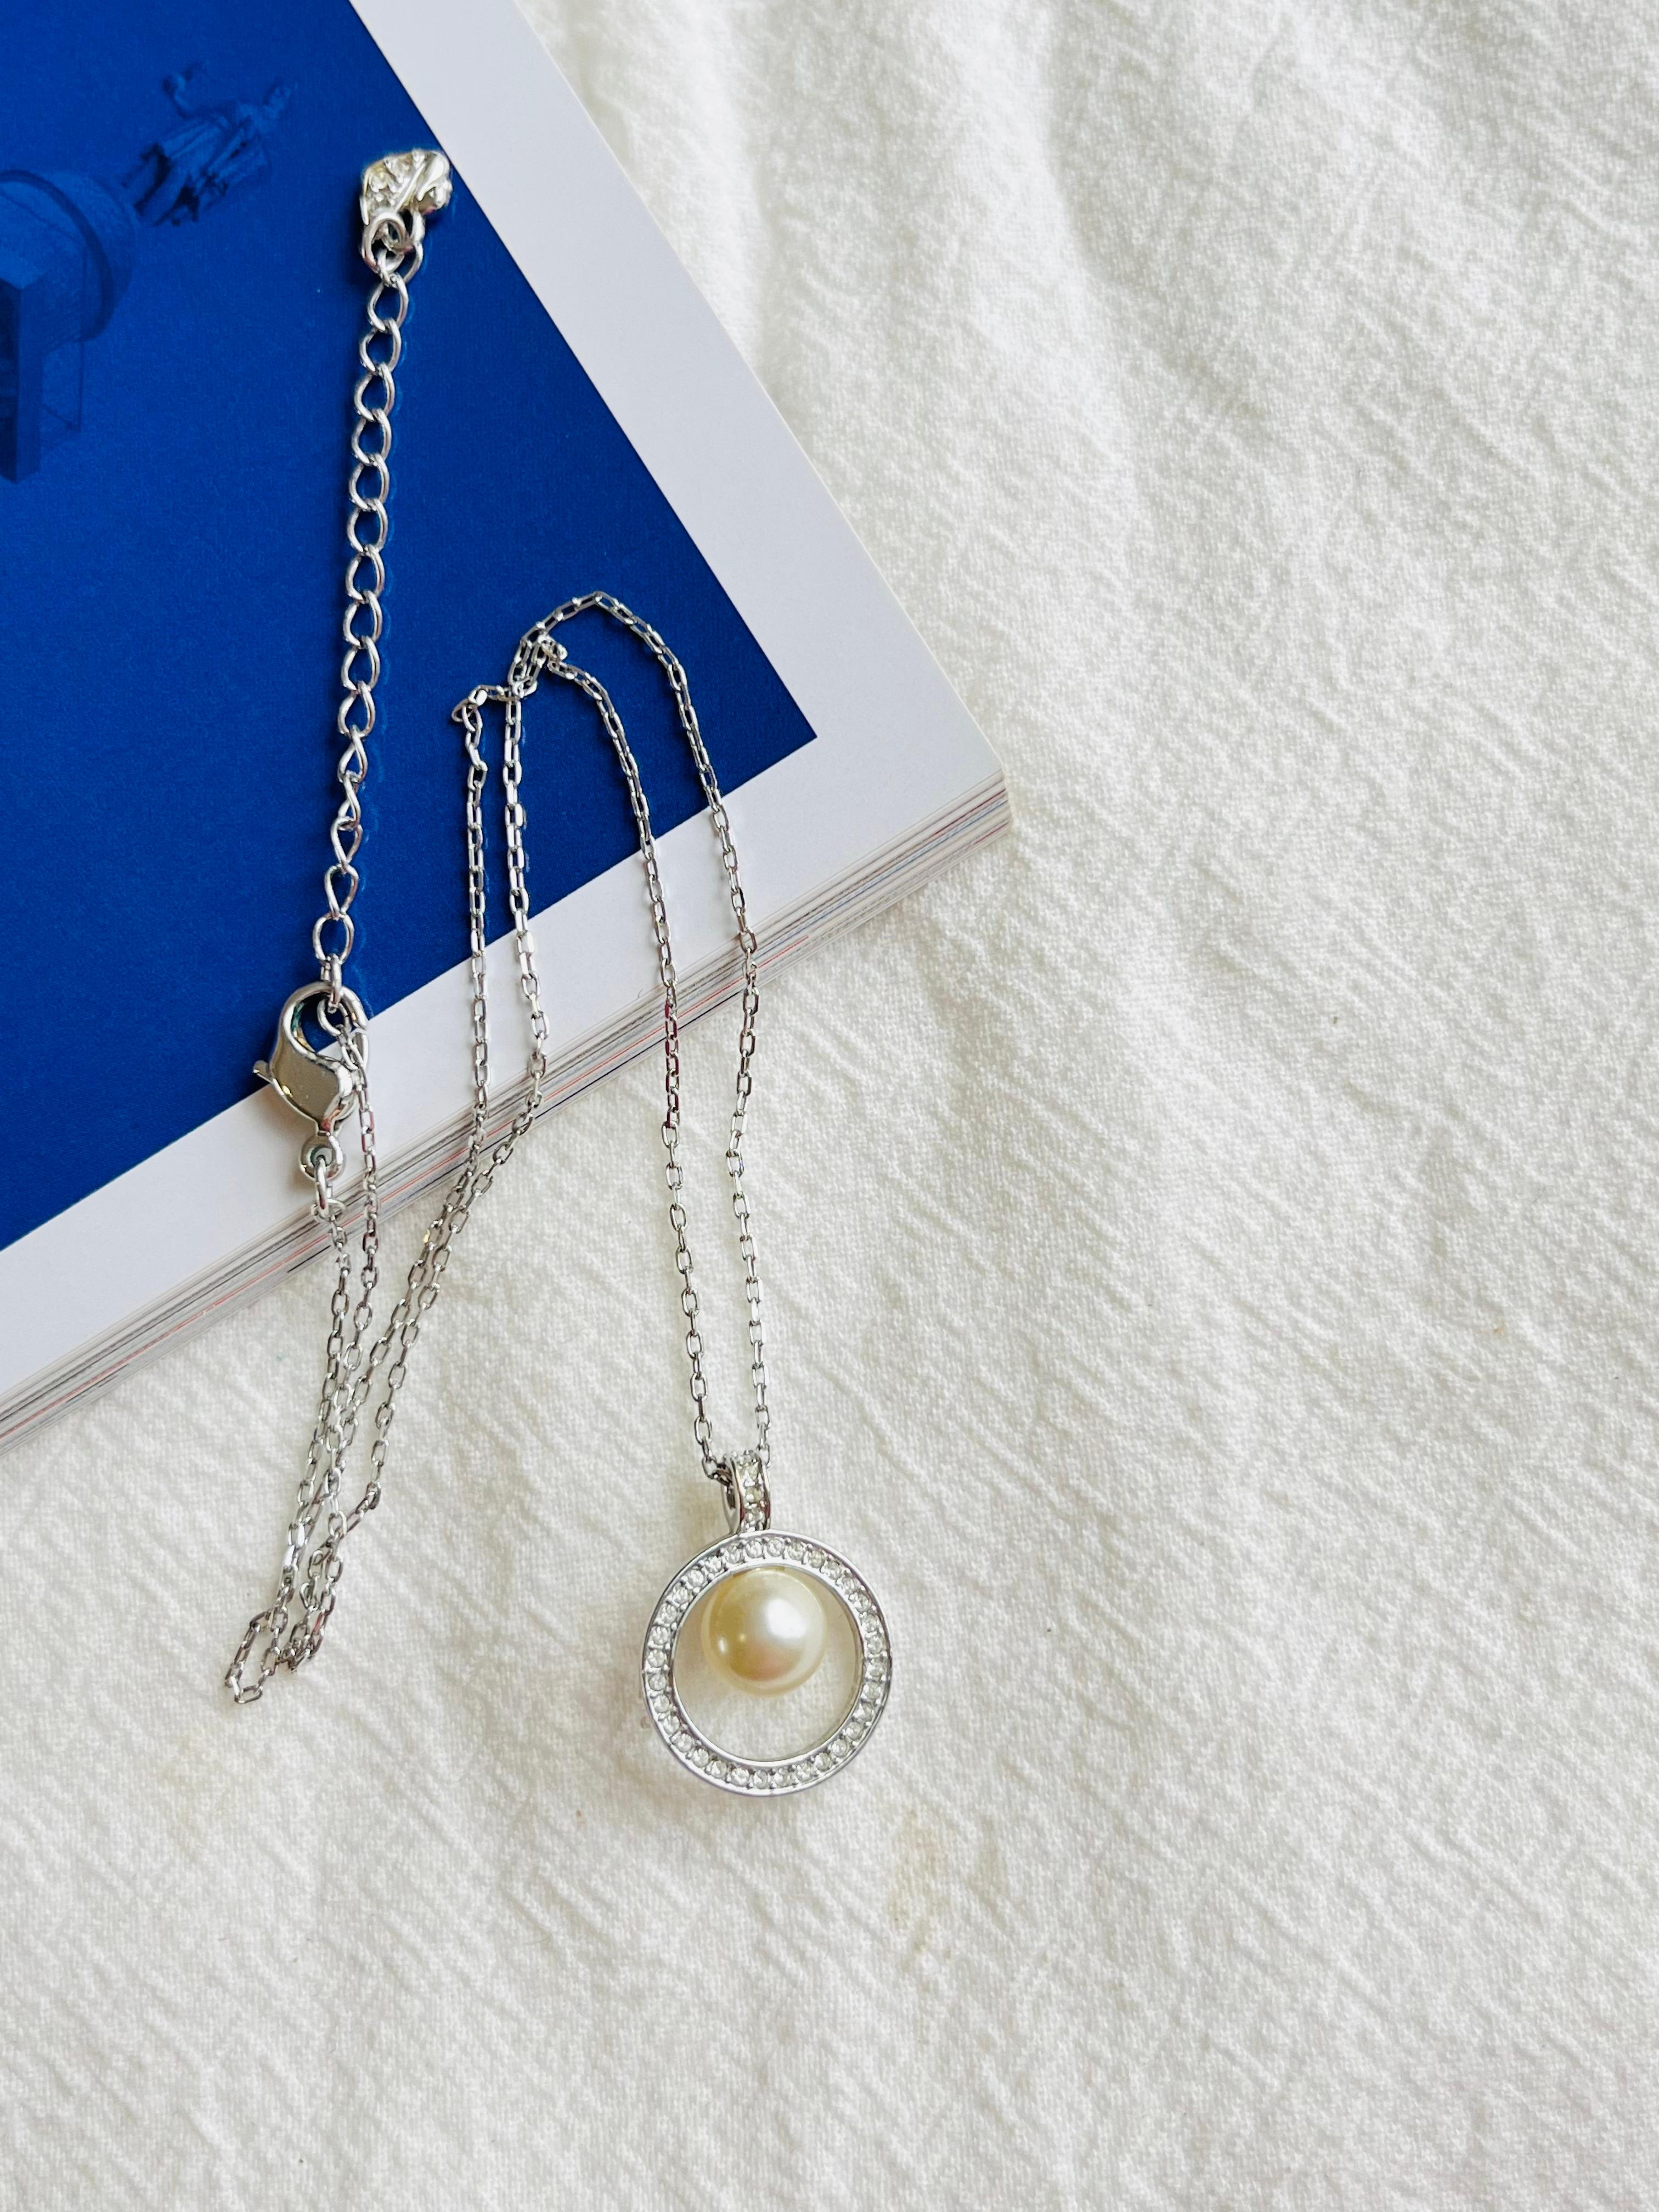 Swarovski Crystals Circle White Round Faux Pearl Openwork Pendant Necklace, Silver Plated

Very good condition and very new.  

Length: 38 cm, extend chain 6 cm. Pendant: 1.7 cm.

_ _ _

Great for everyday wear. Come with velvet pouch and beautiful